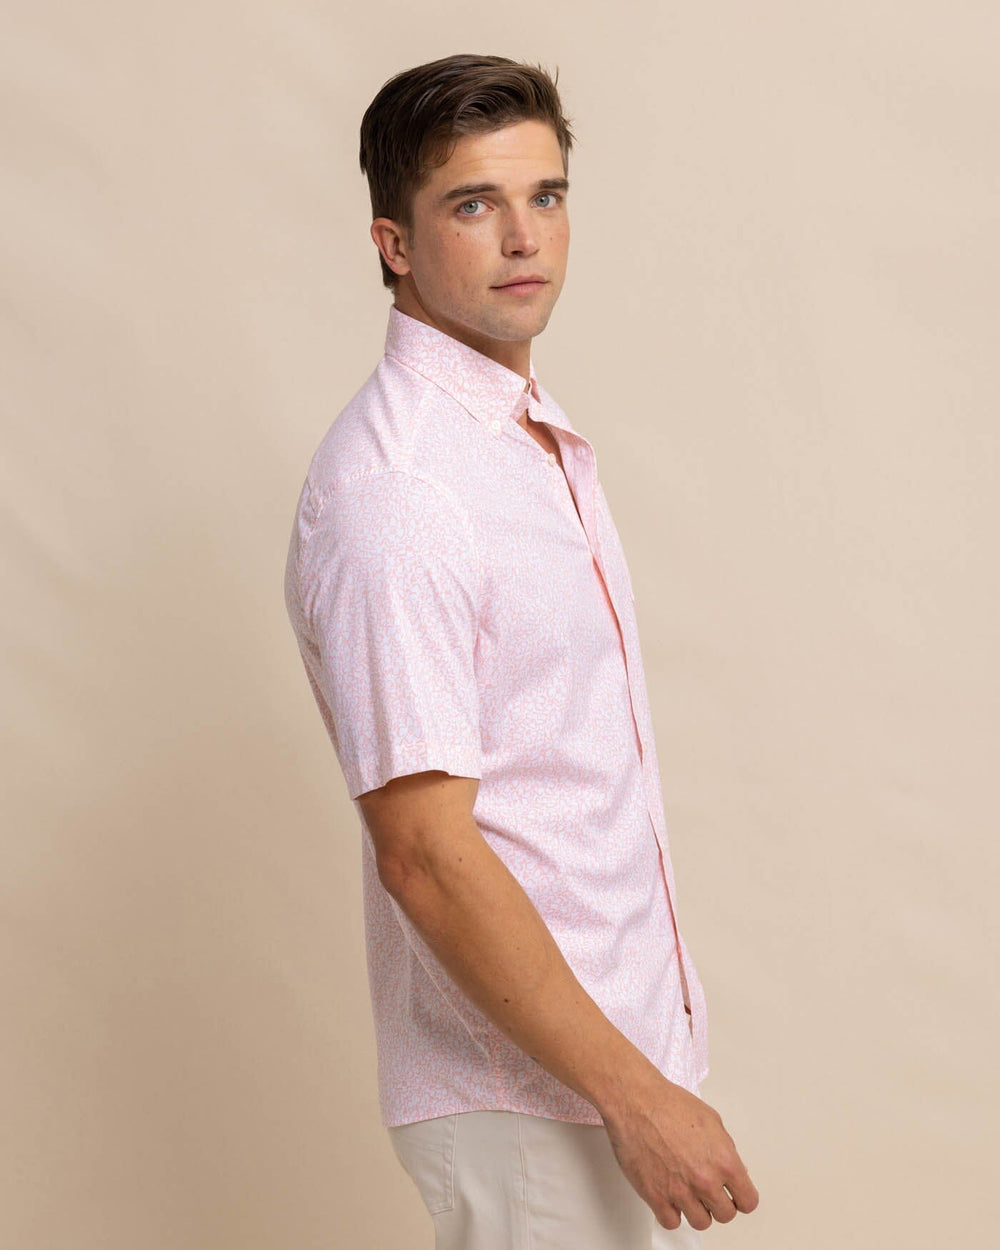 The front view of the Southern Tide brrr Intercoastal That Floral Feeling Short Sleeve Sport Shirt by Southern Tide - Apricot Blush Coral